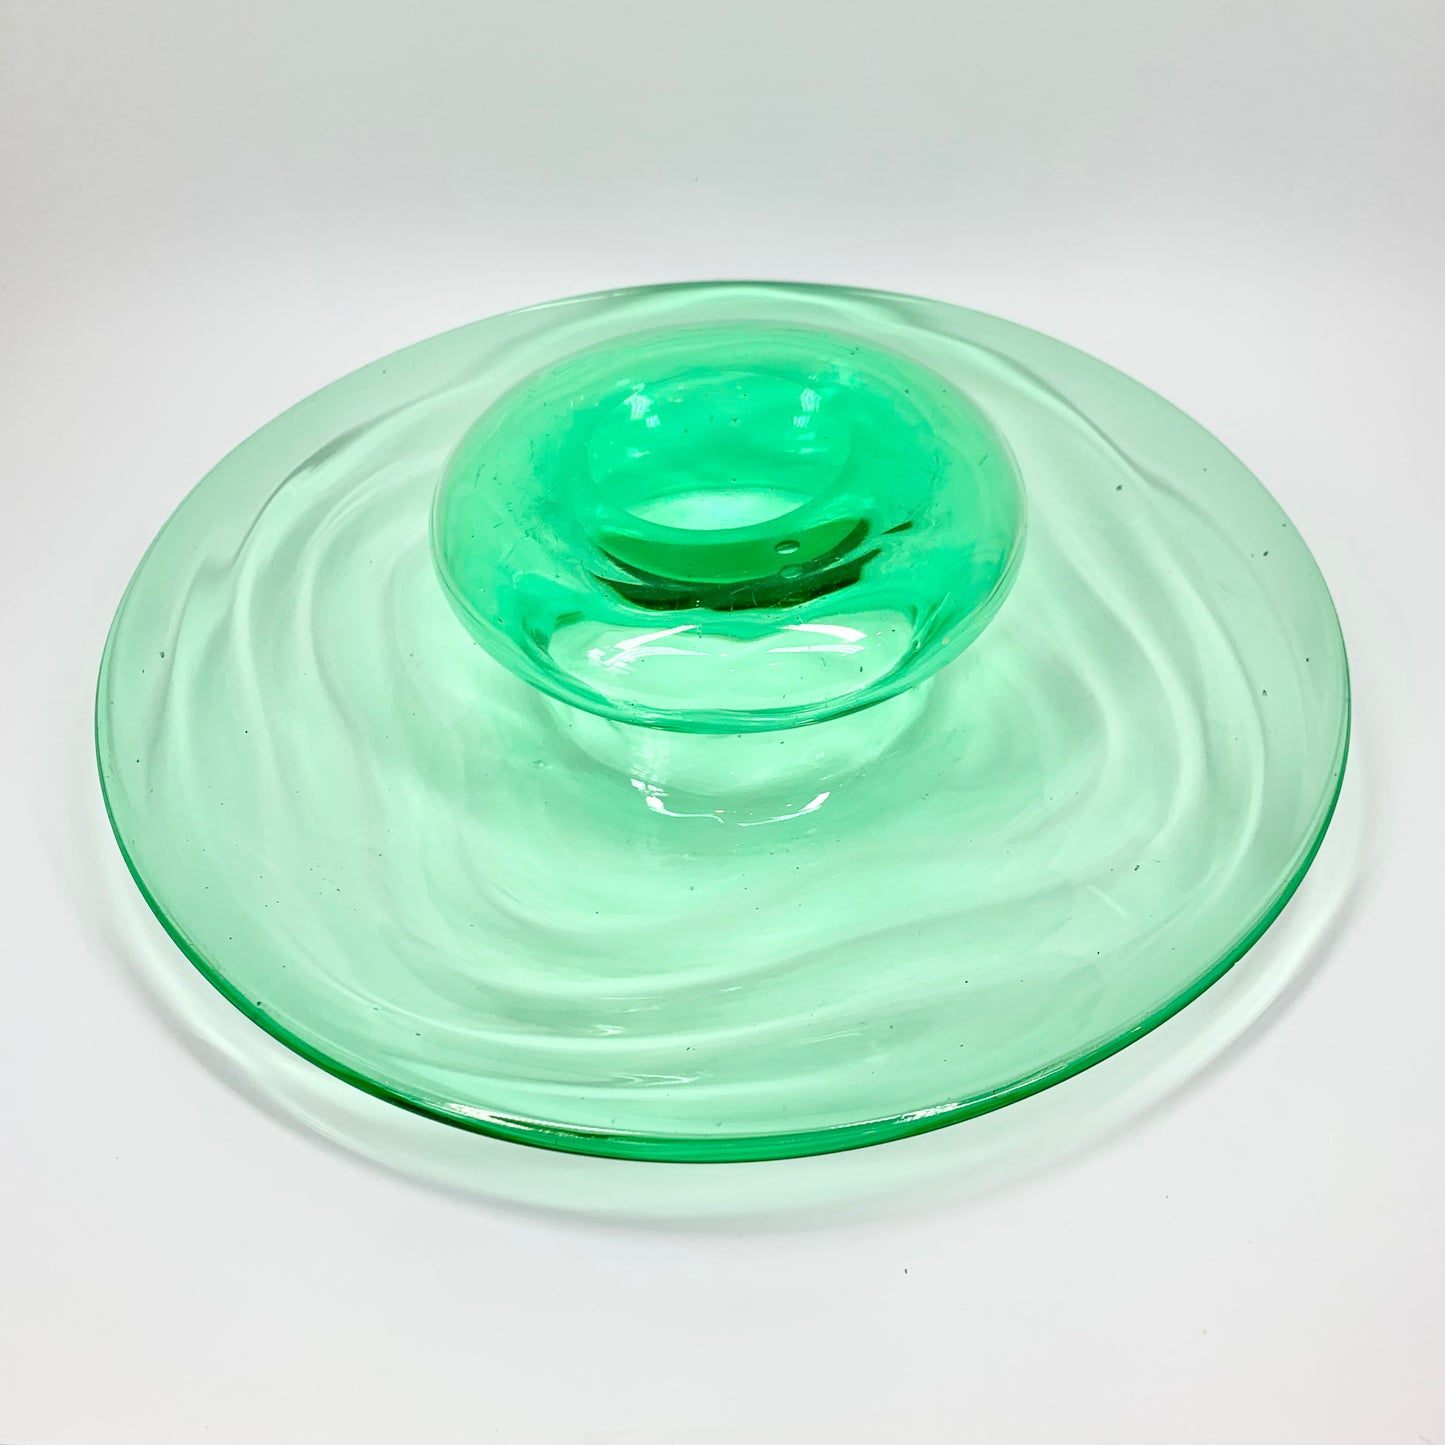 Extremely rare Midcentury studio hand made green glass decorative bowl